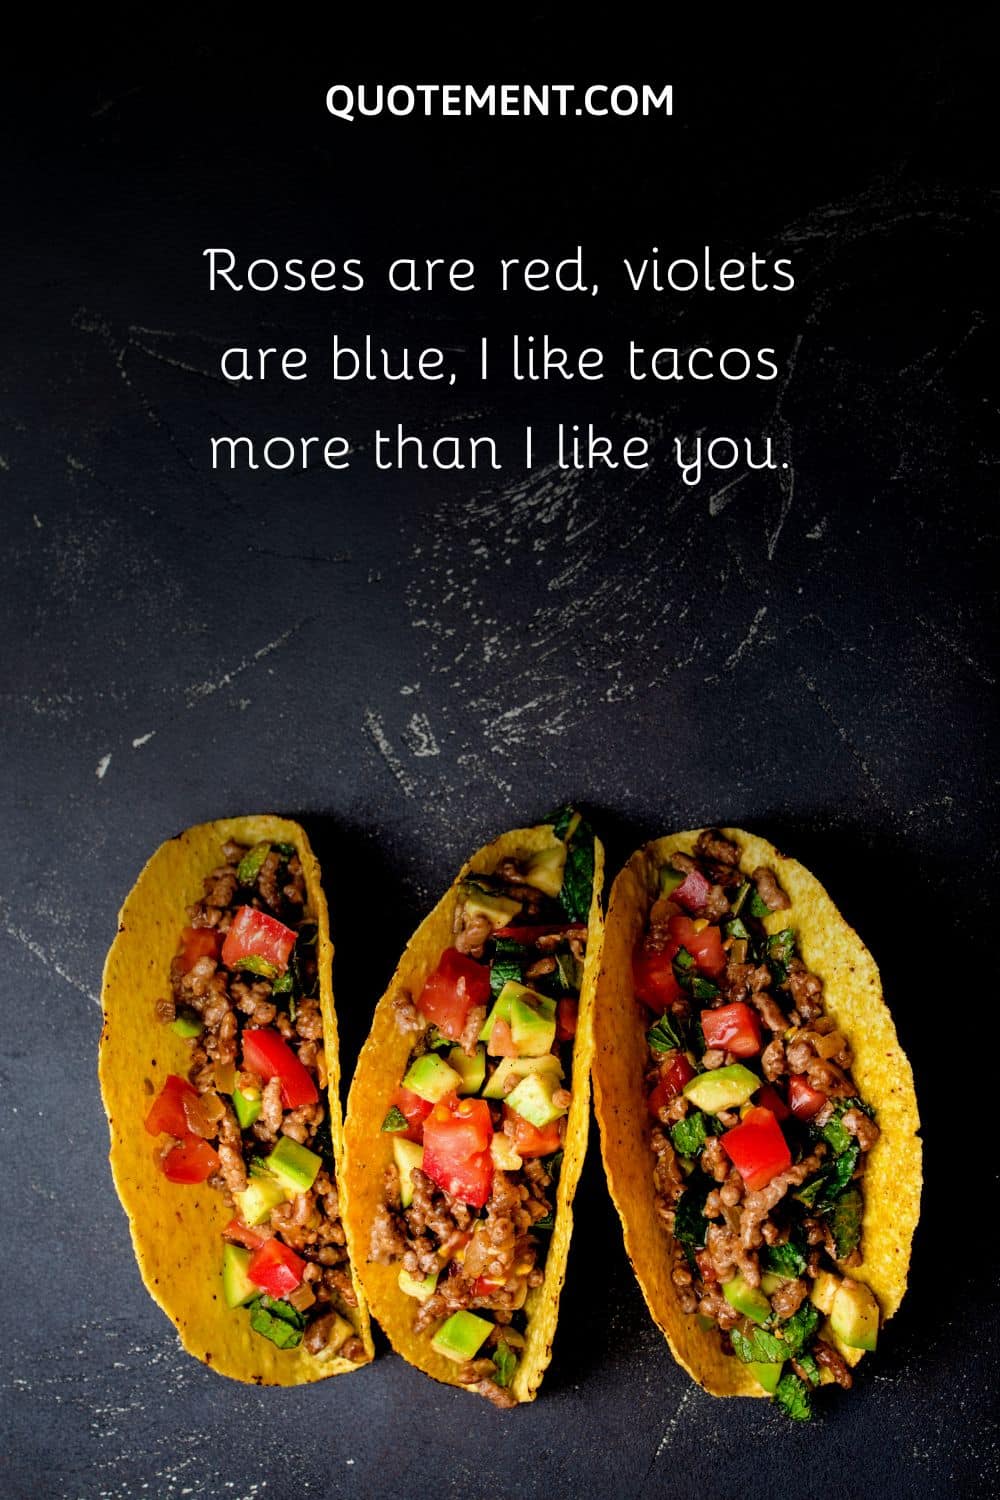 Roses are red, violets are blue, I like tacos more than I like you